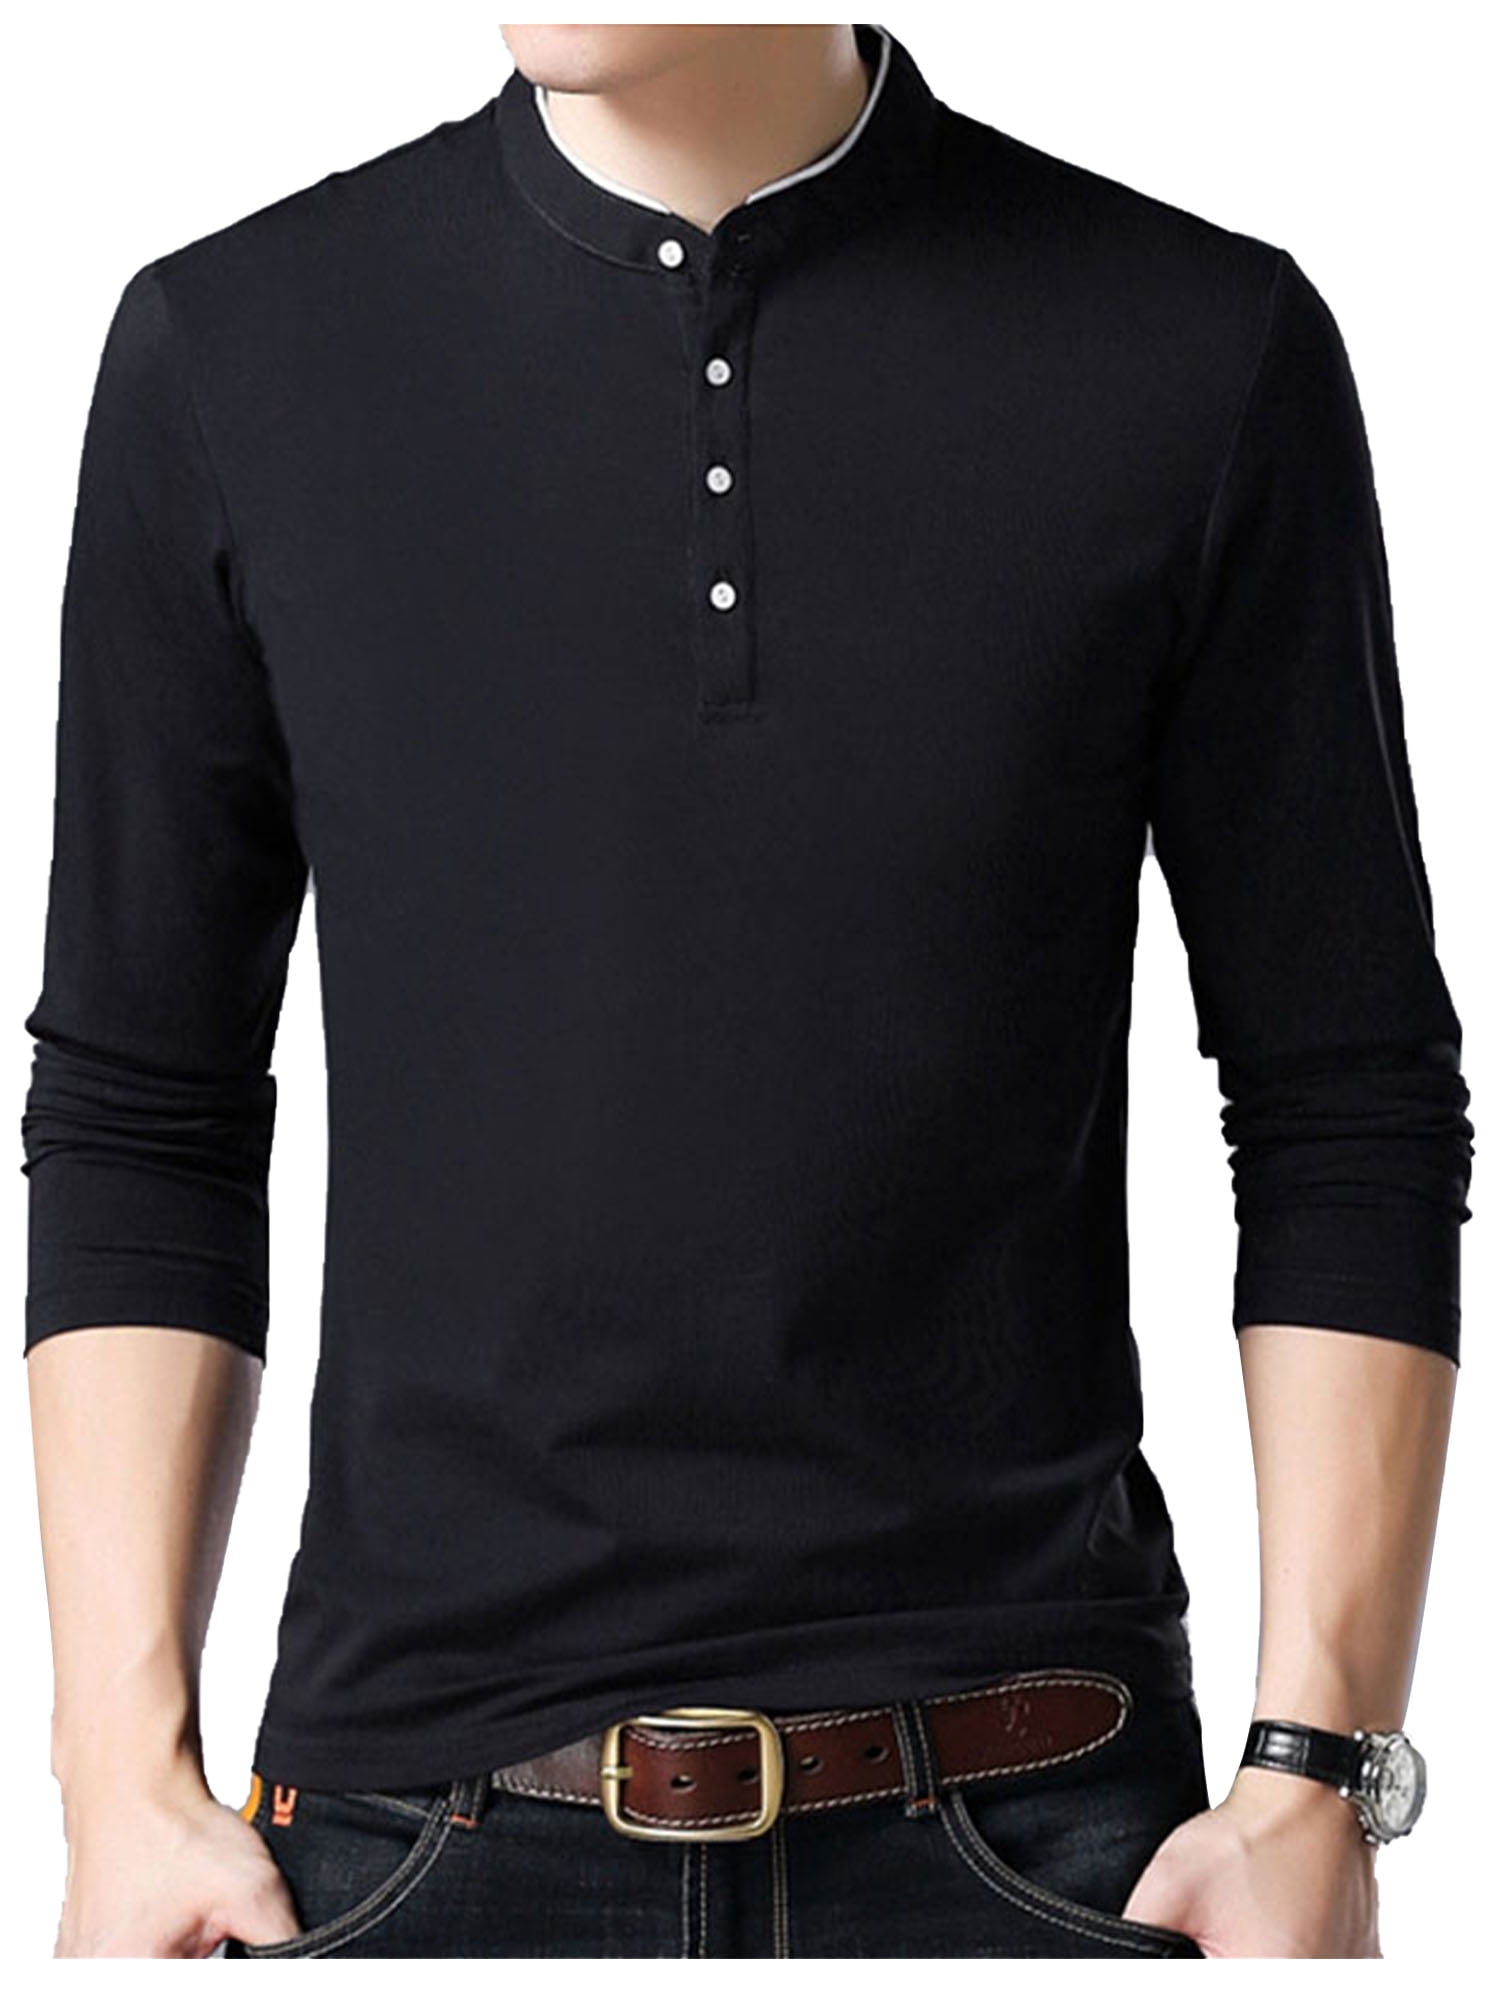 Men's Slim Fit Long Sleeve Casual T Shirts Polo Stand Collar Button ...